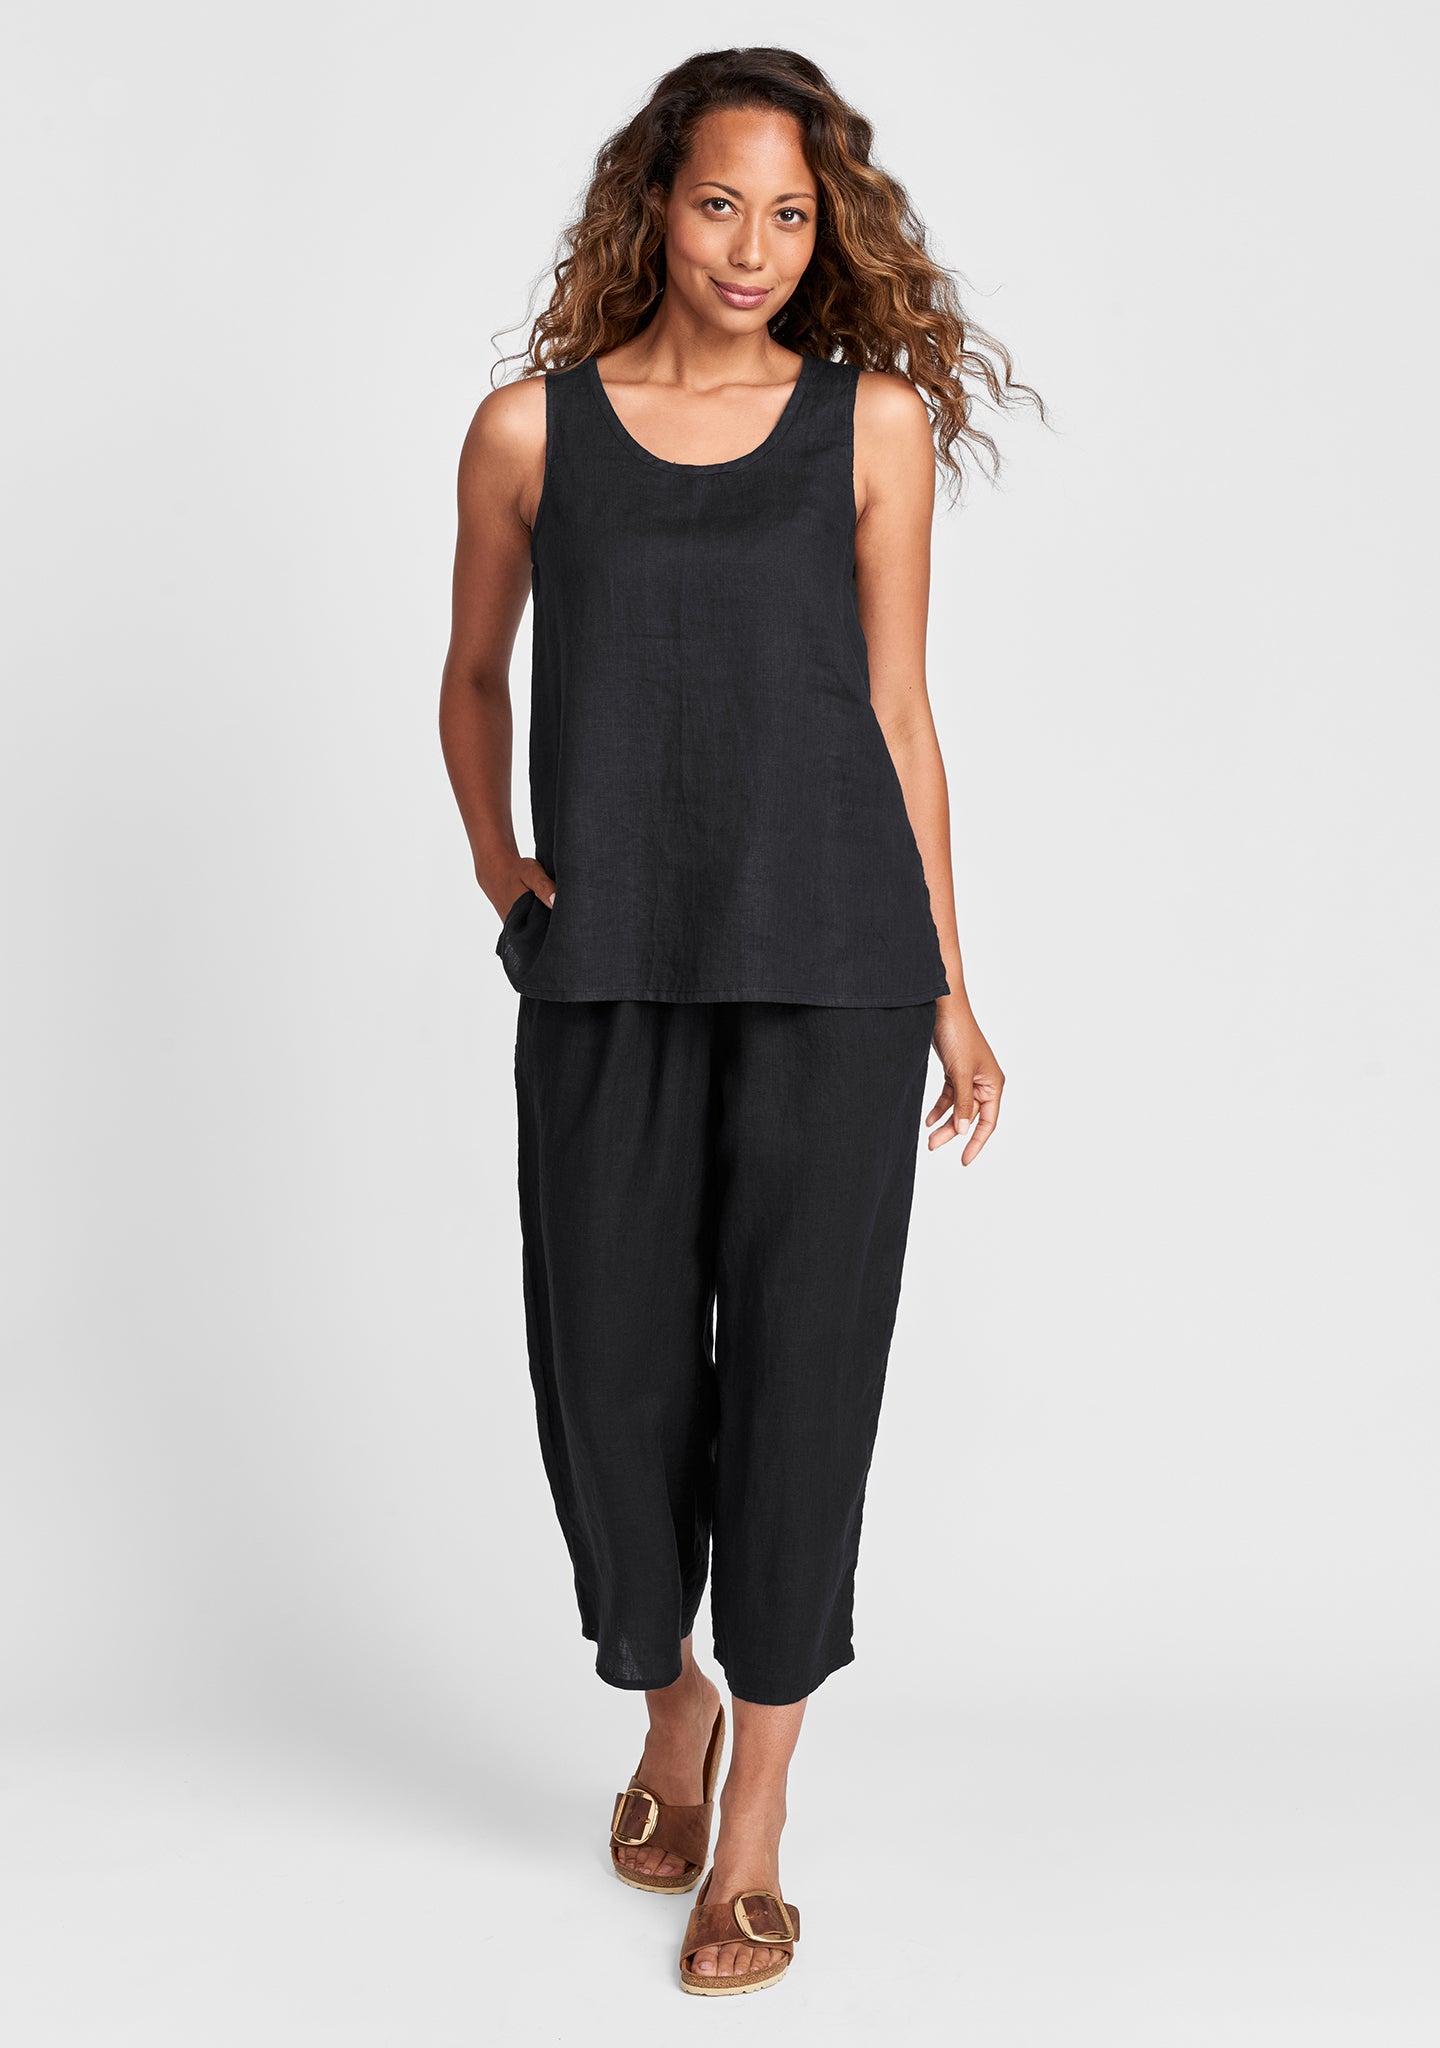 FLAX linen tank in black with linen pants in black